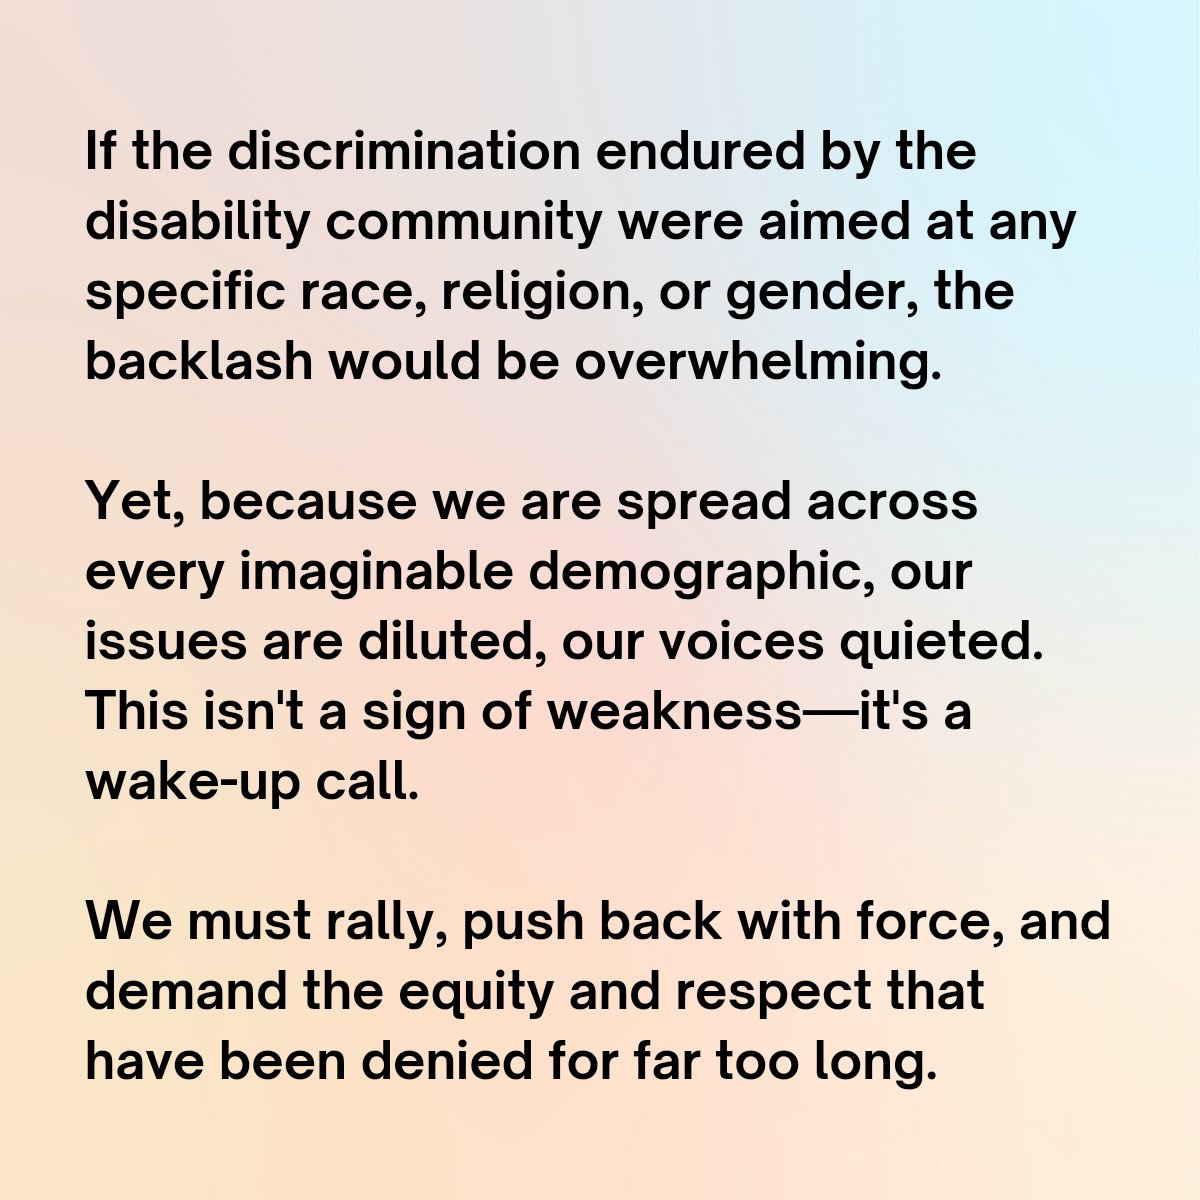 If the discrimination endured by the disability community were aimed at any specific race, religion, or gender, the backlash would be overwhelming. Yet, because we are spread across every imaginable demographic, our issues are diluted, our voices quieted. This isn't a sign of